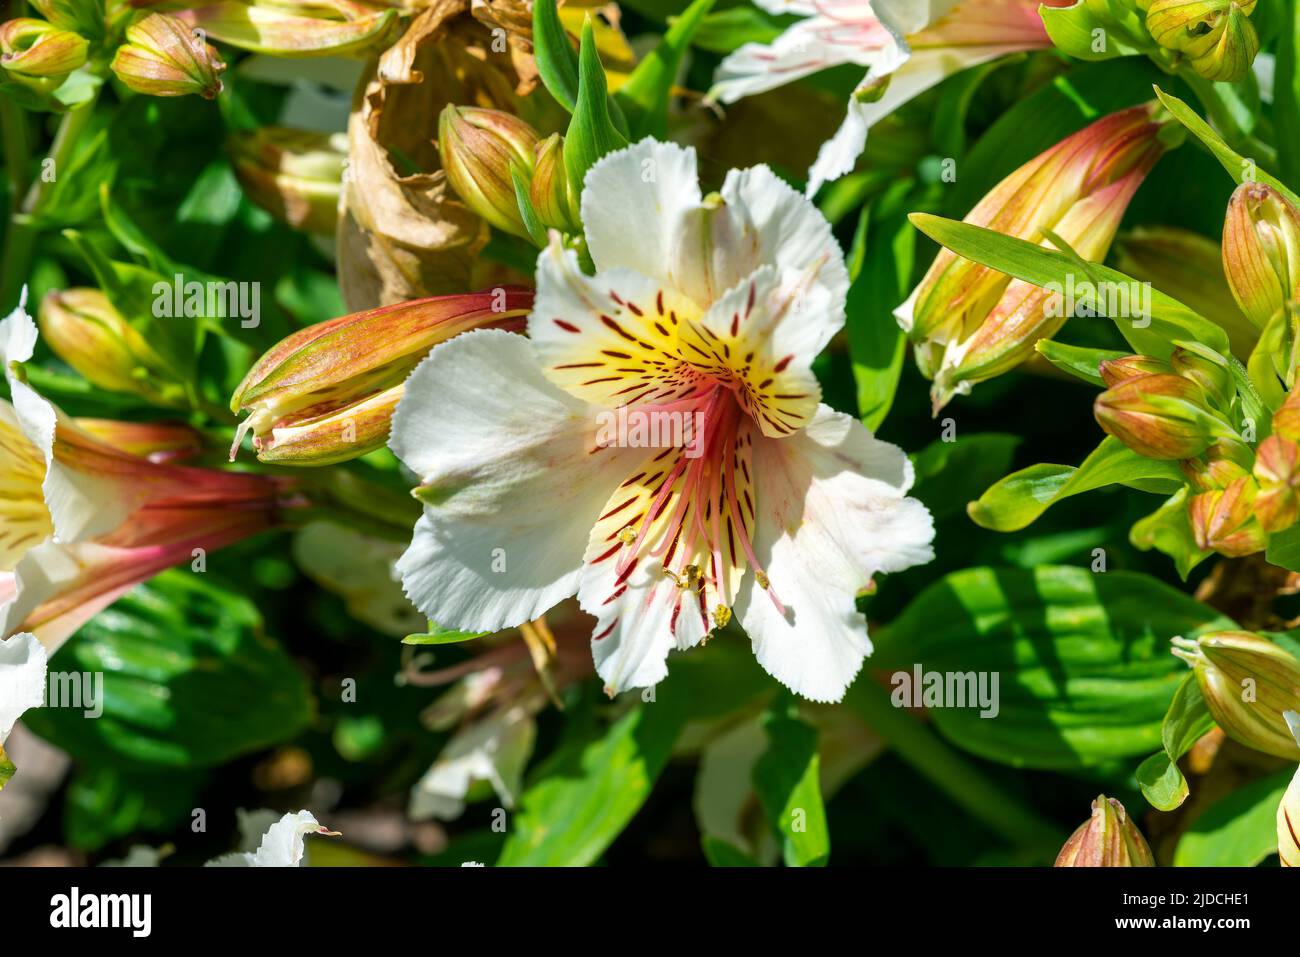 Alstroemeria 'Princess Stephanie' a dwarf summer flowering plant with a pink yellow summertime flower also known as Alstroemeria 'Stapirag' and common Stock Photo